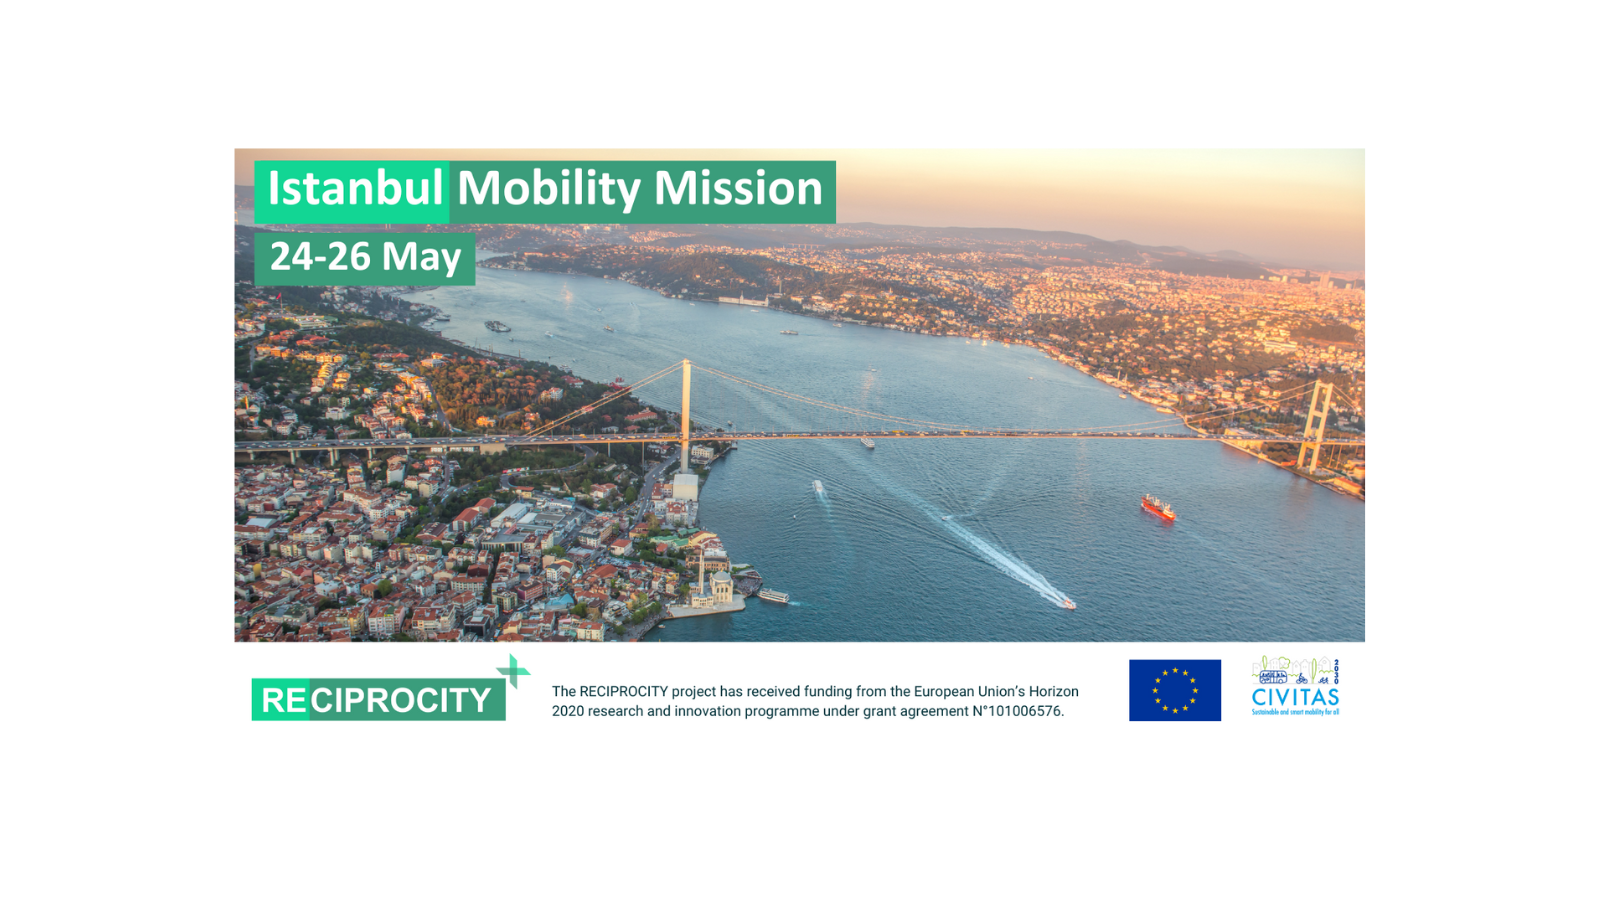 Istanbul Mobility Mission - RECIPROCITY